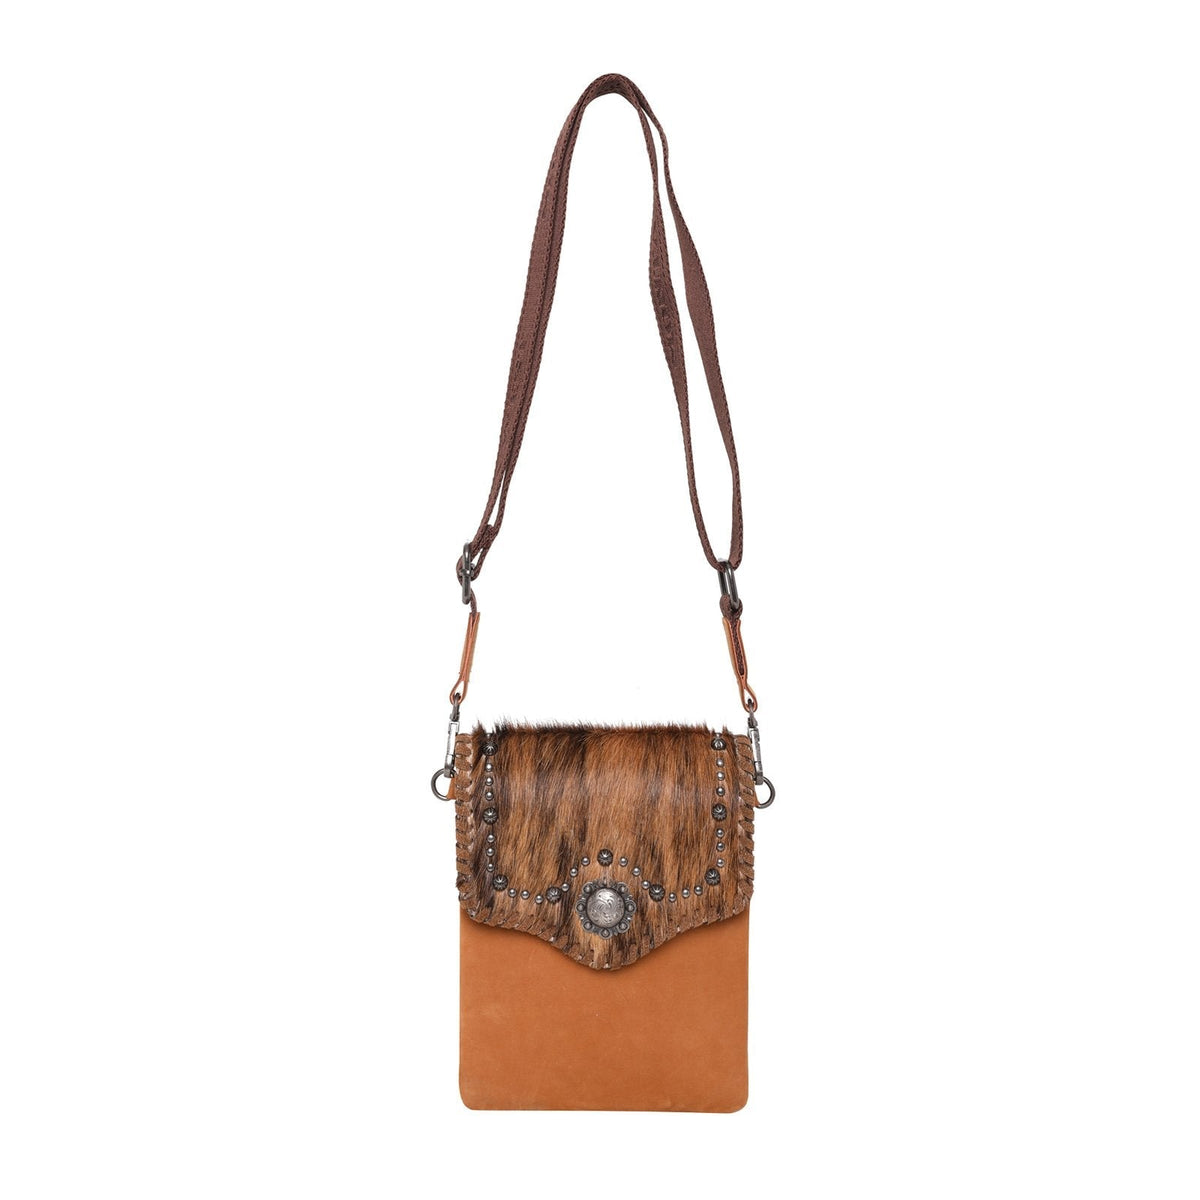 MUD x LAV Is The Western Handbag Collab Of The Spring! - COWGIRL